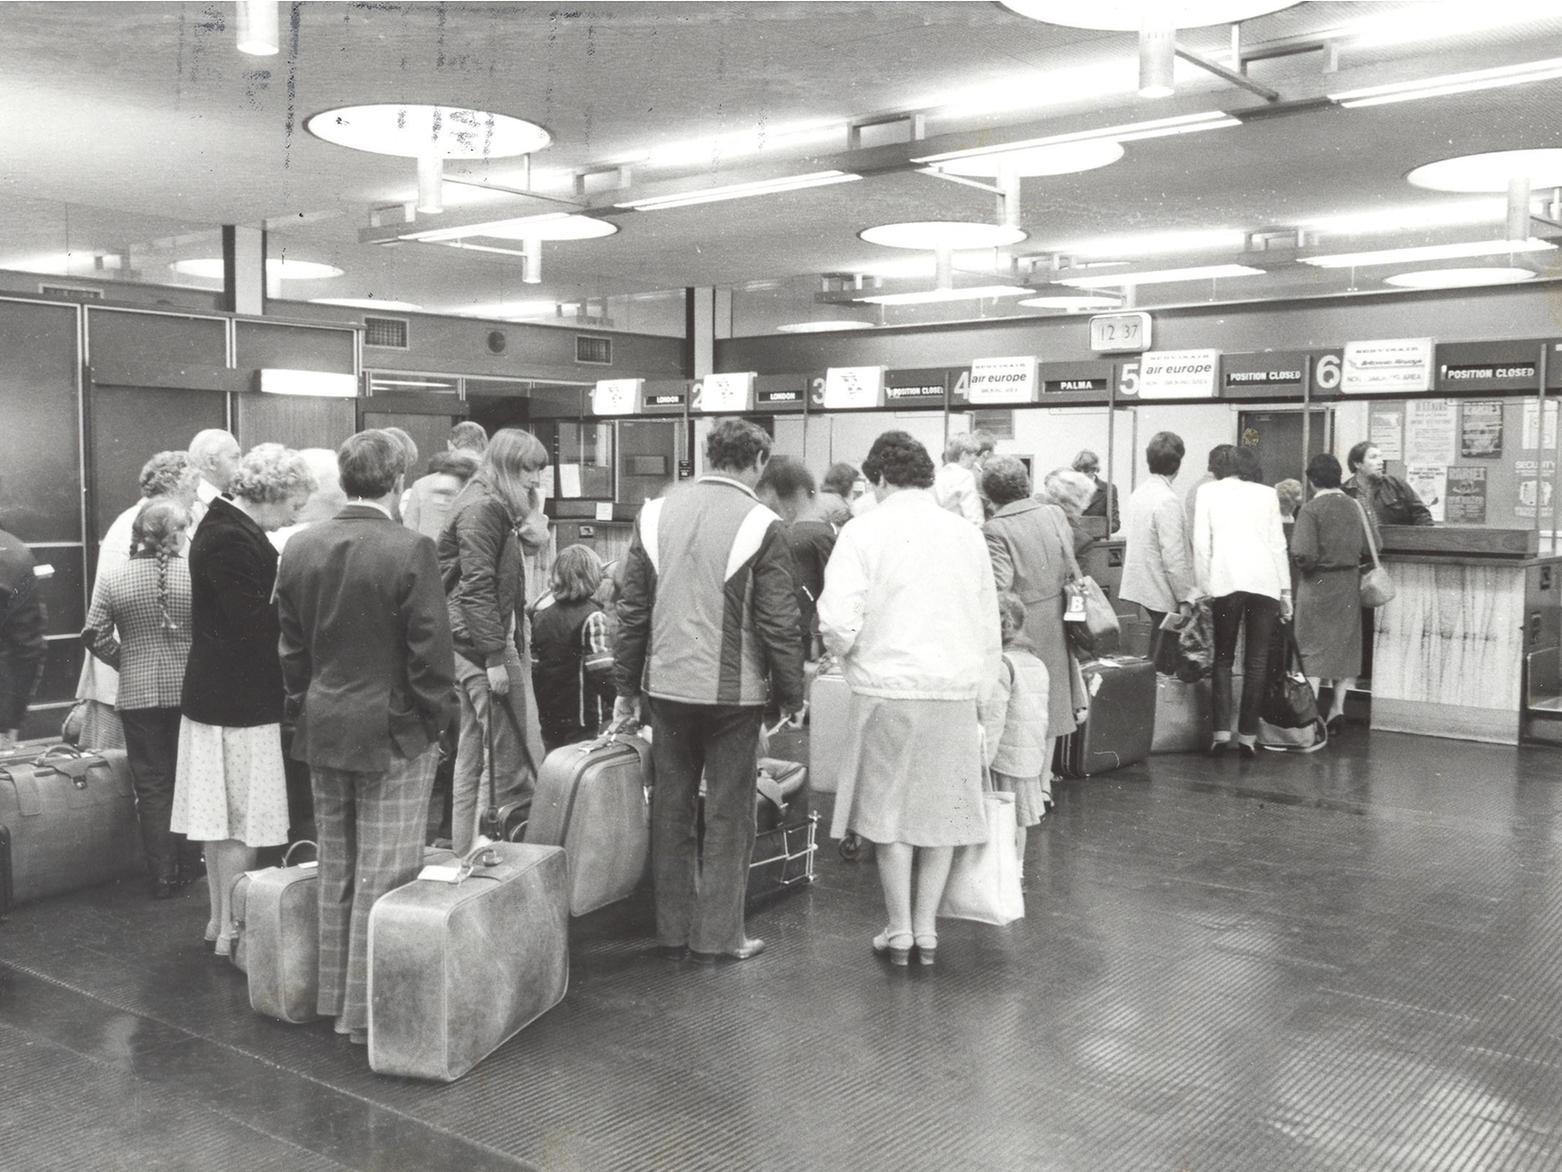 Passengers queue at check in for a flight from Leeds Bradford.